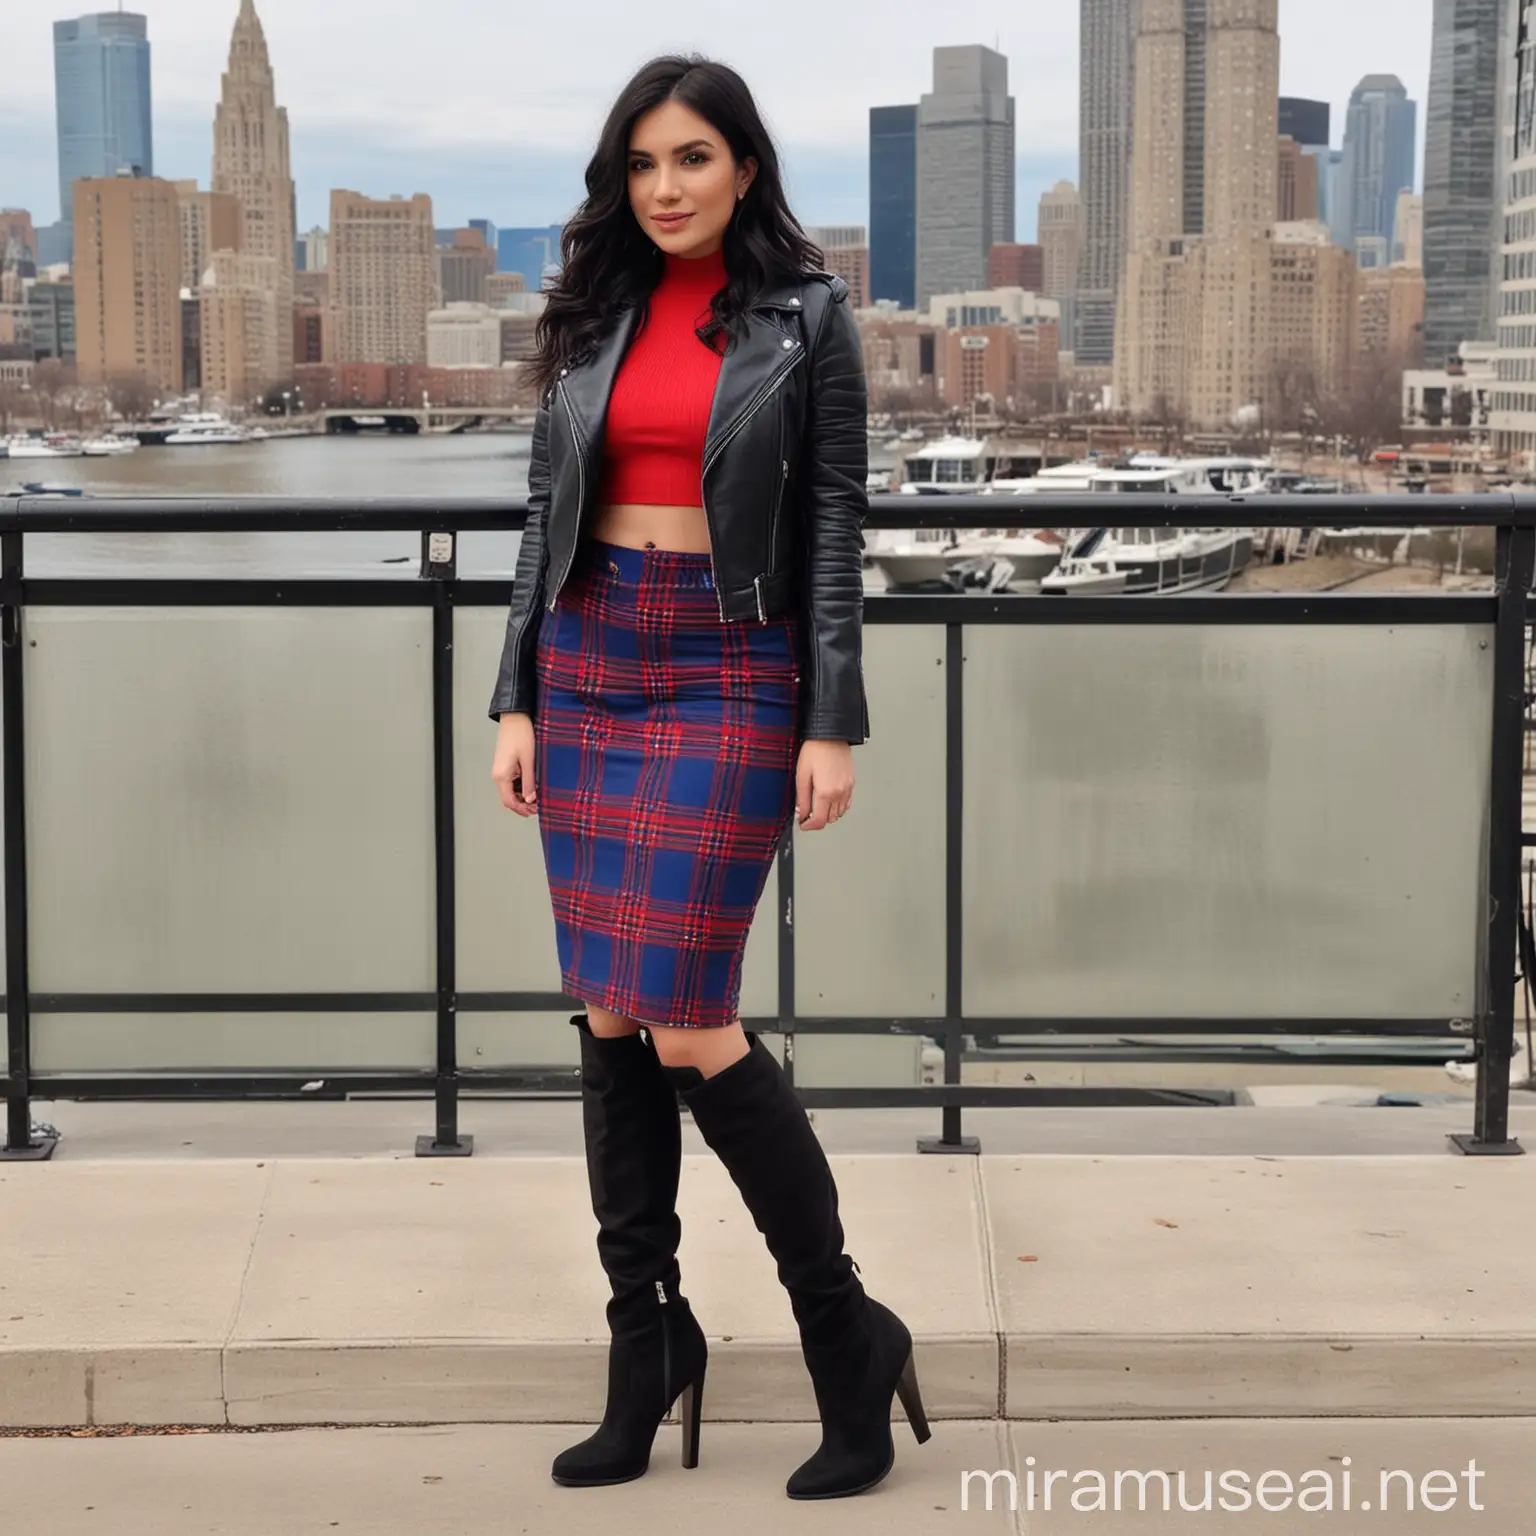 Fashionable Woman in Buffalo Check Skirt and Royal Blue Moto Jacket with City Backdrop